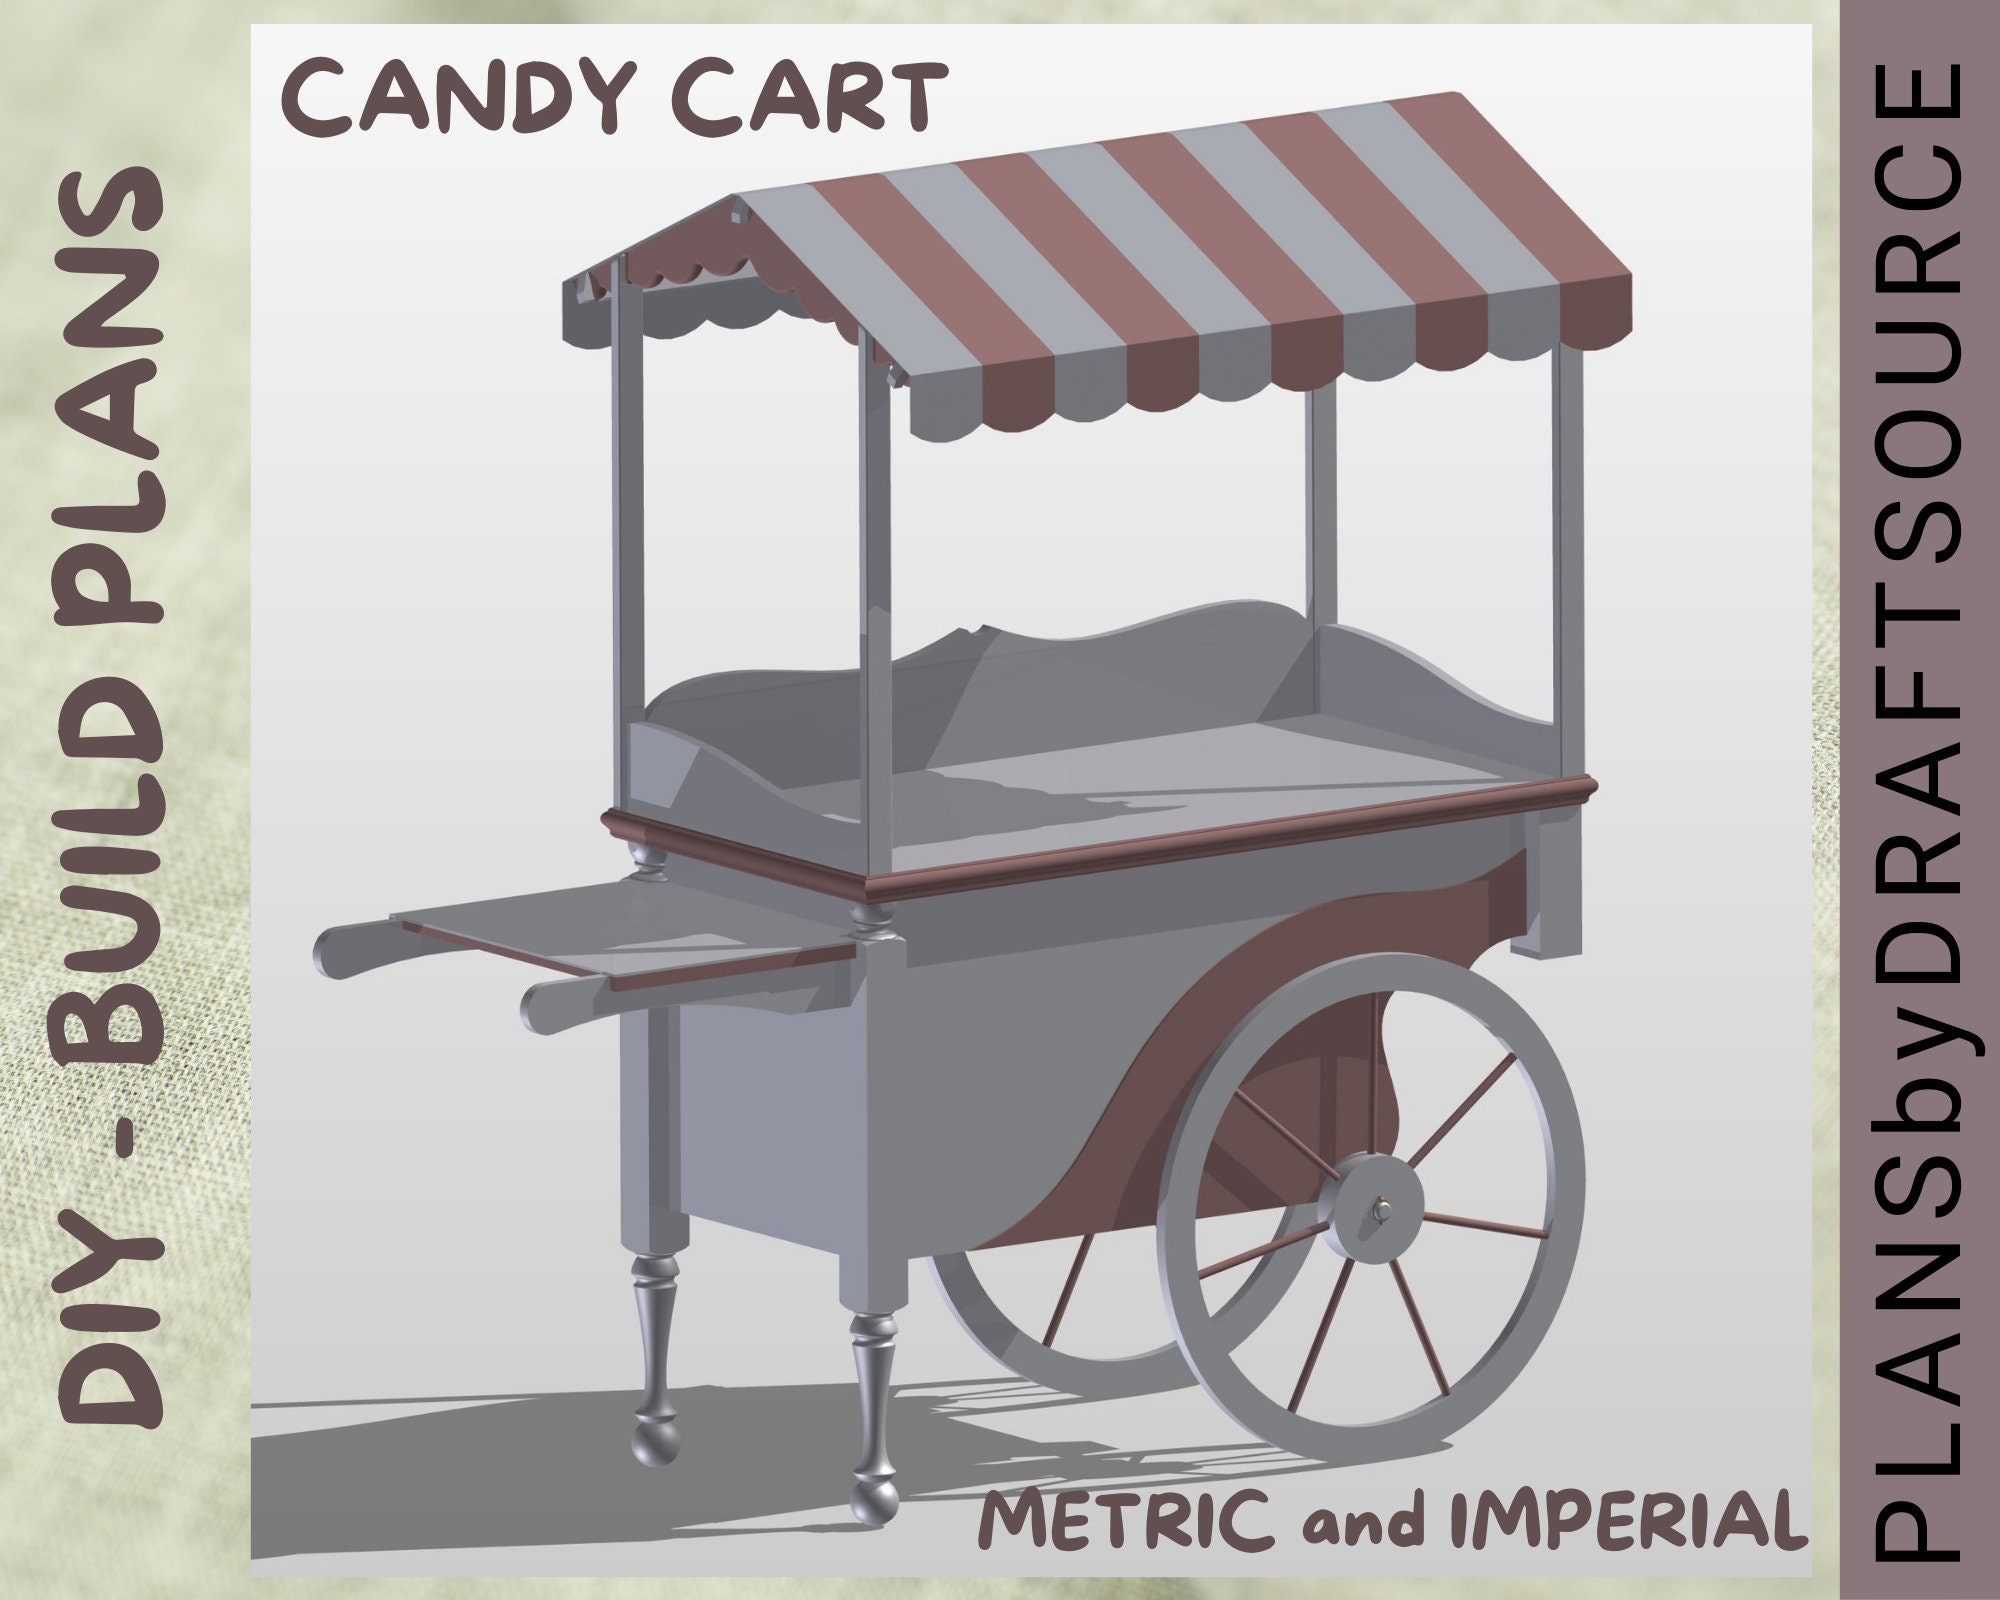 Wooden Candy Cart Diy Plans In Mm And Inches Etsy